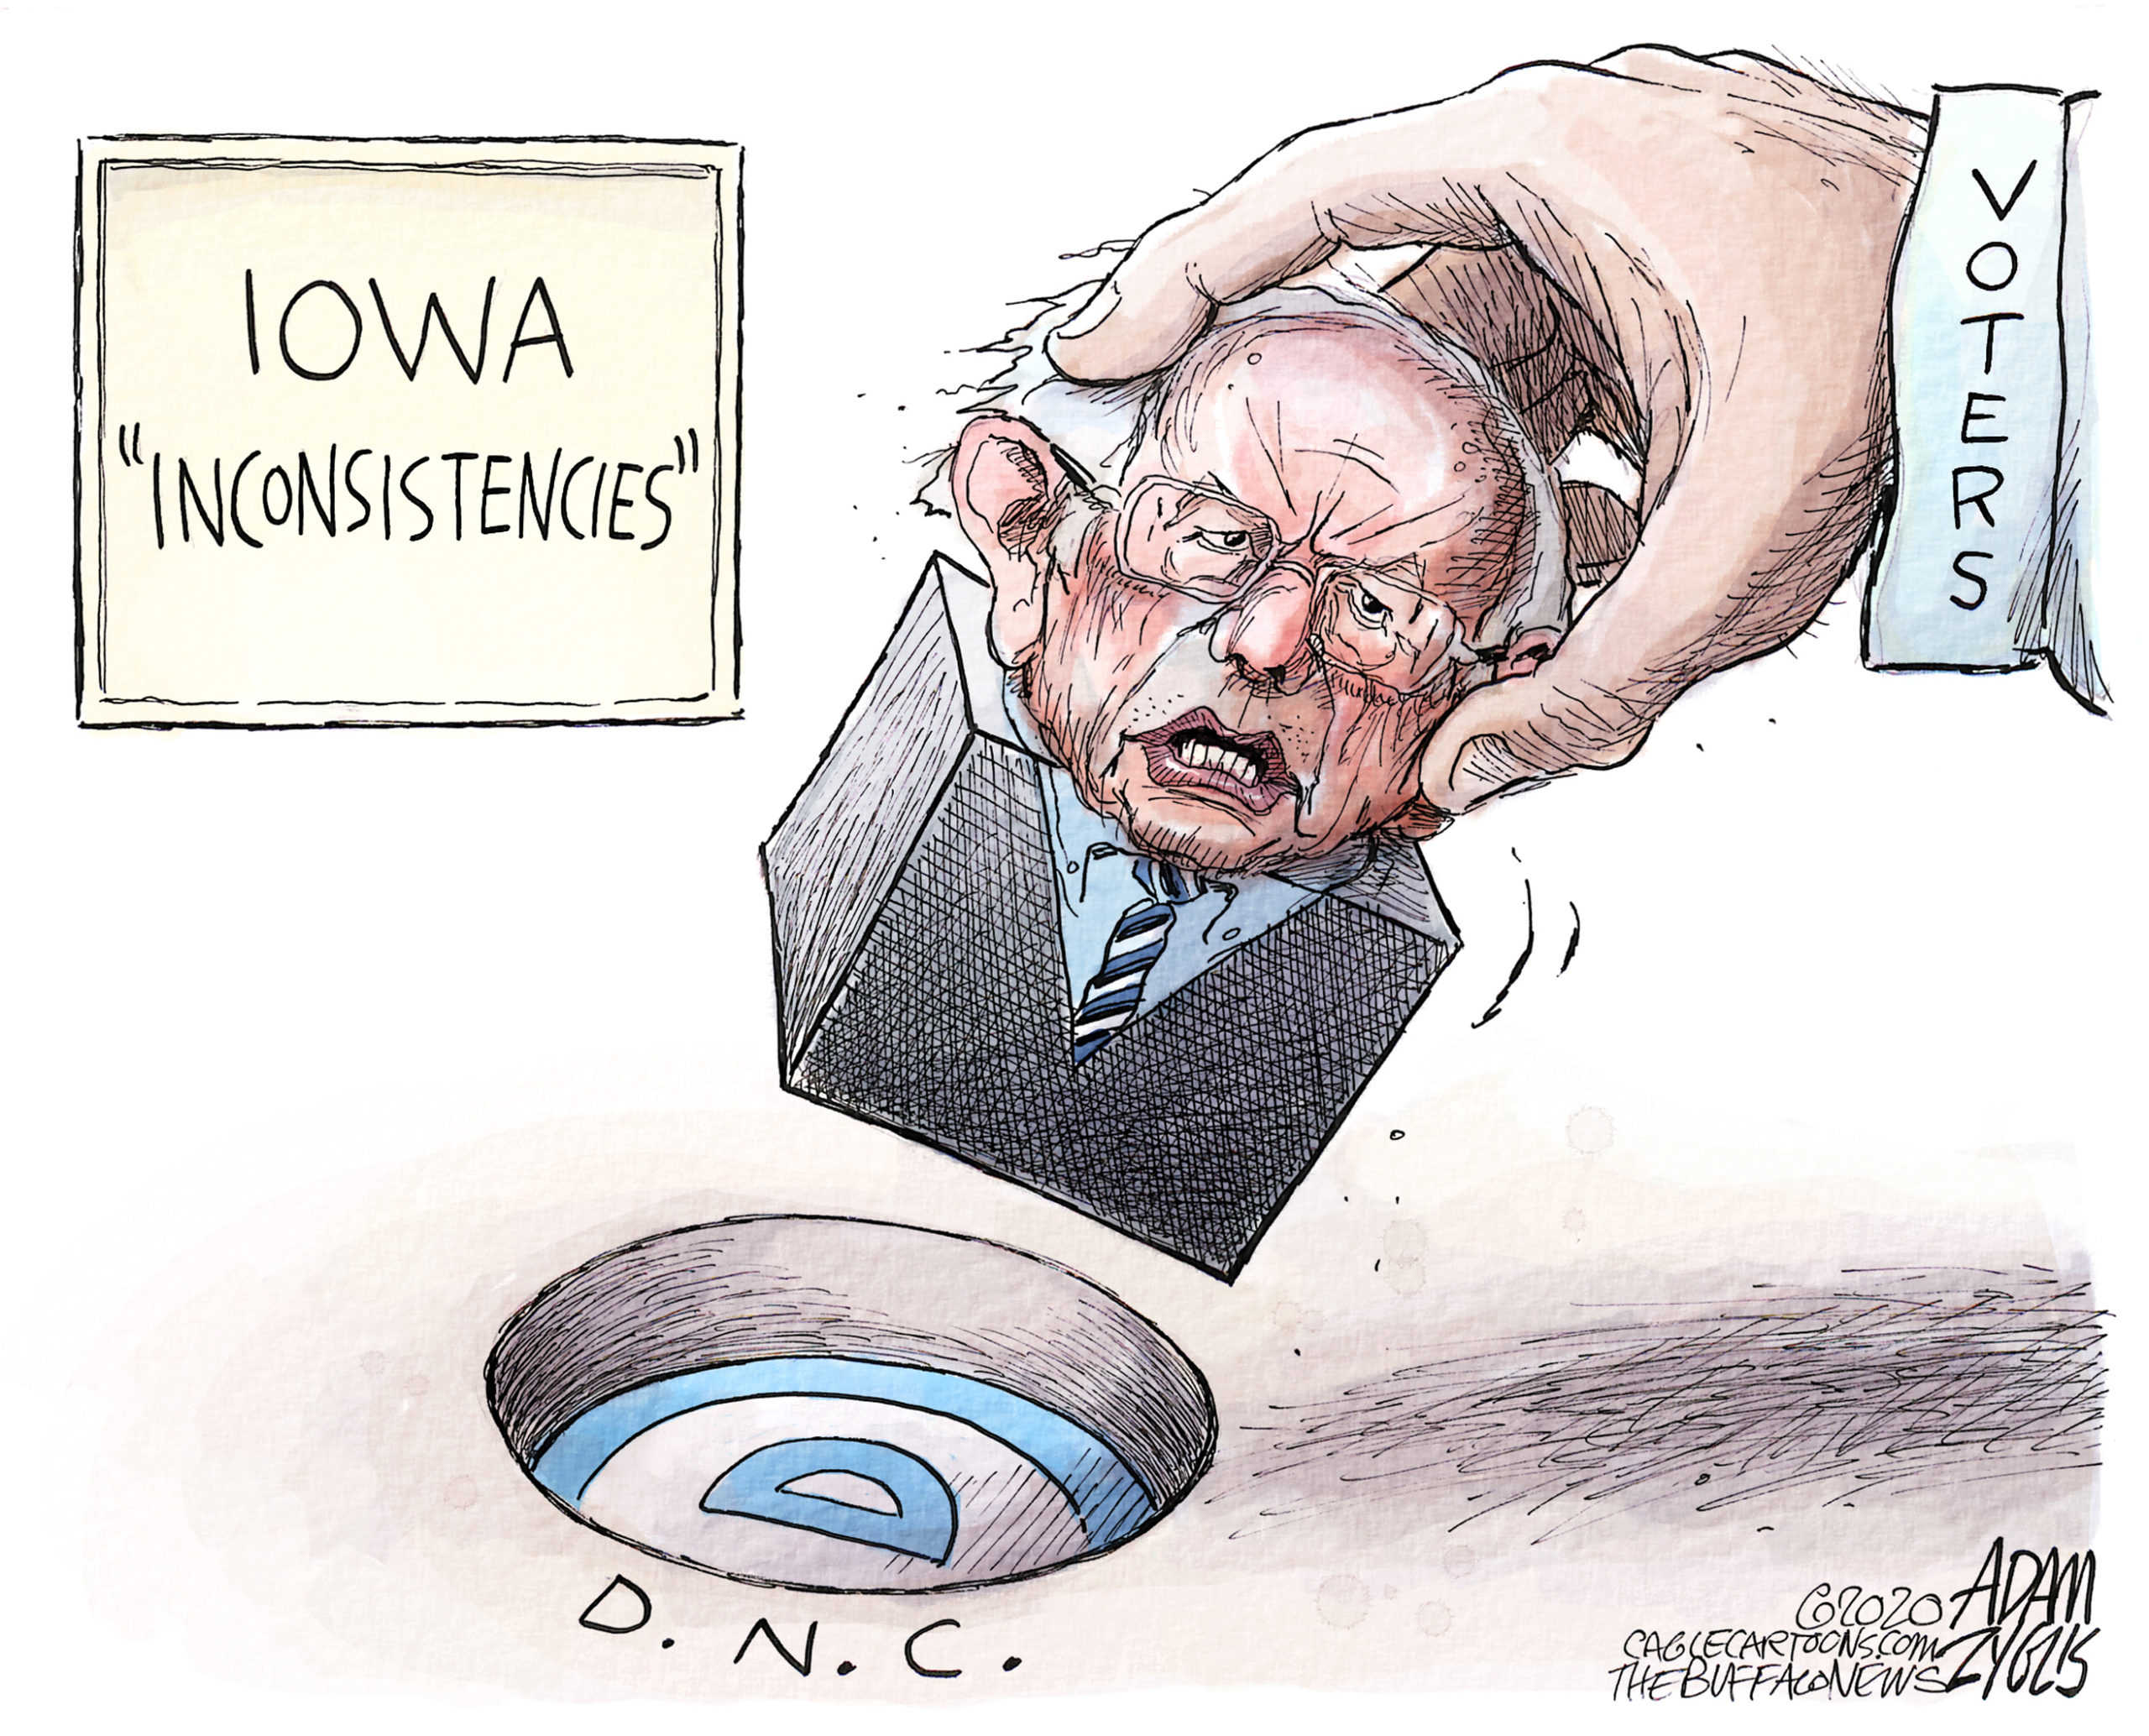 A cartoon about the 2020 democratic Iowa caucuses.